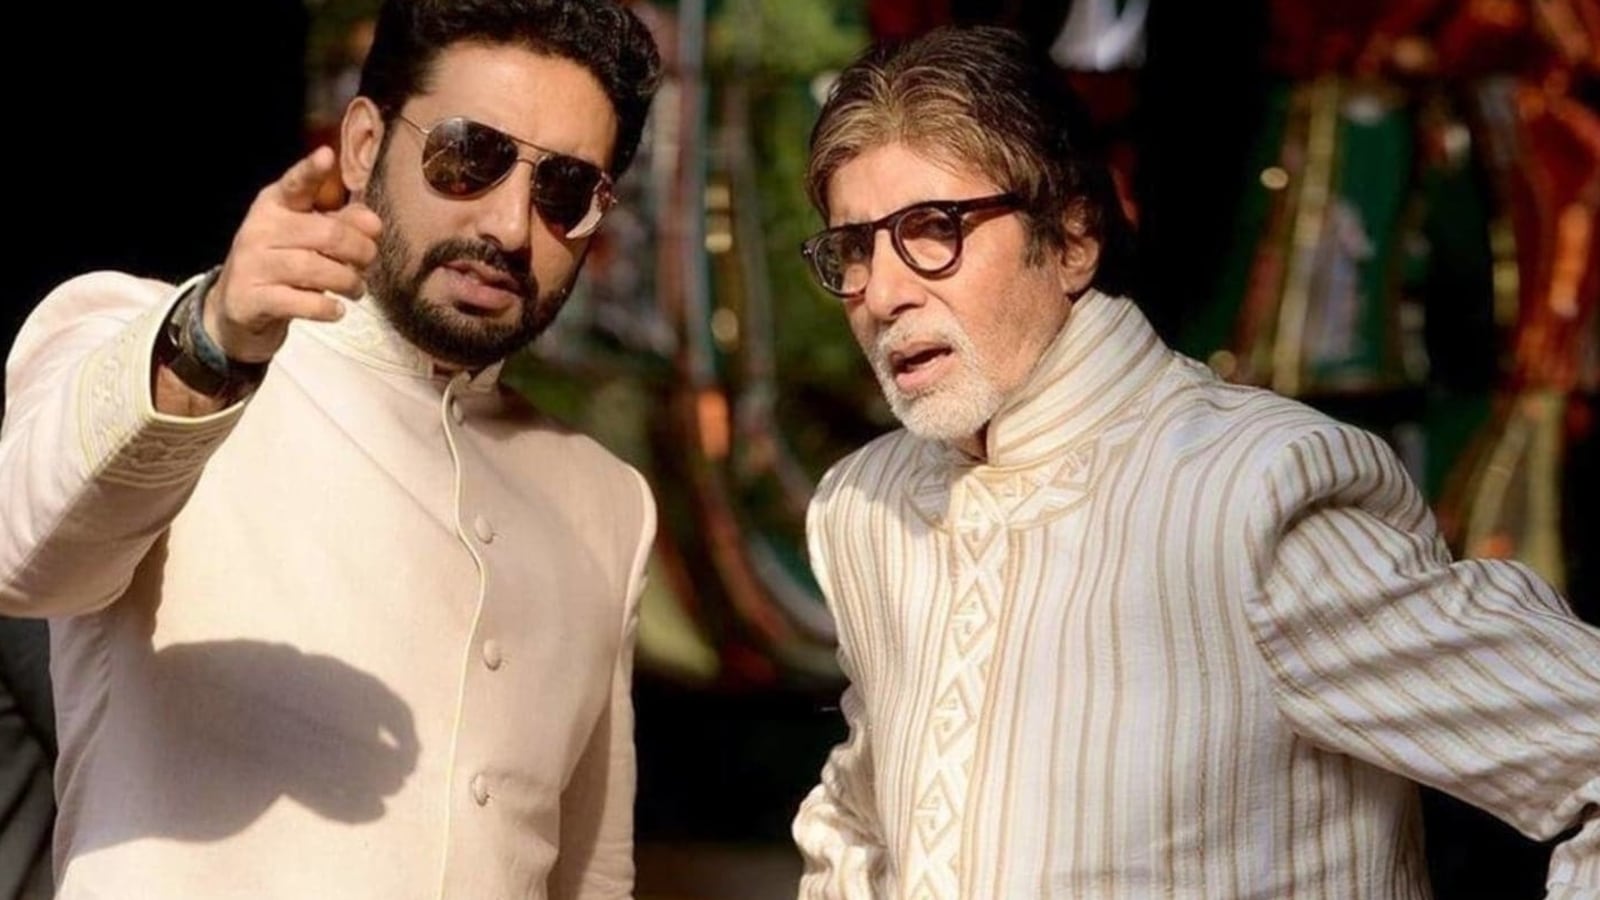 Abhishek Bachchan reacts to dad Amitabh Bachchan praising Dasvi on social media: ‘When you have overemotional parents’